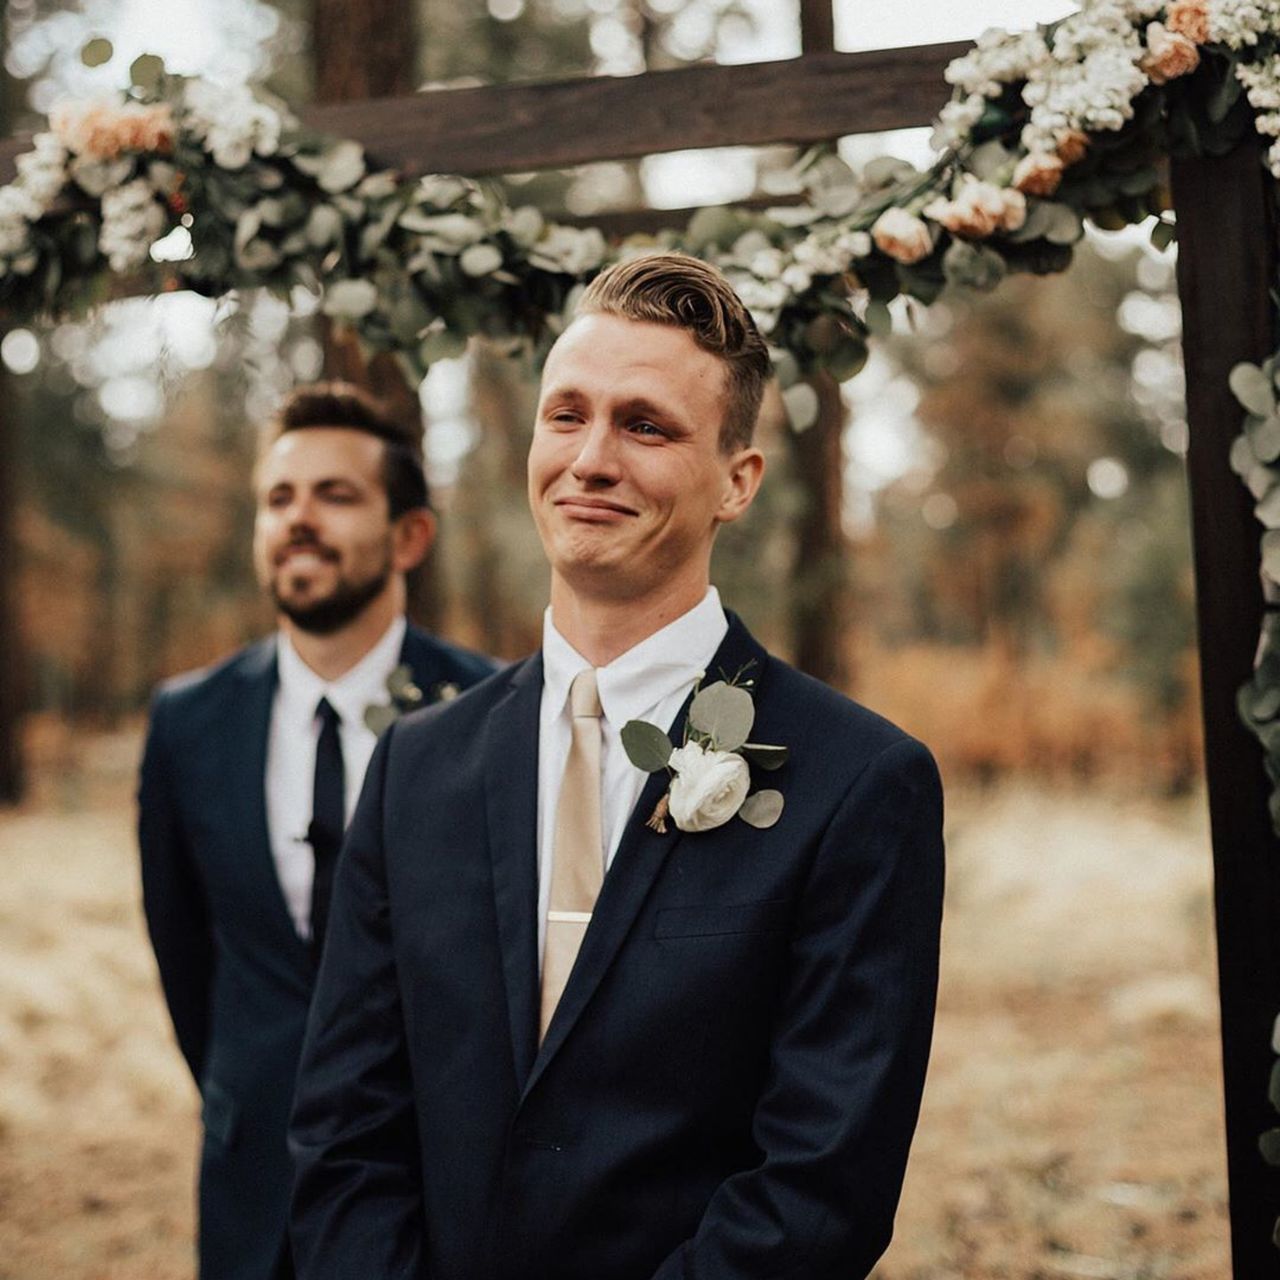 wedding, married, bride, bridegroom, celebration, event, focus on foreground, love, men, life events, wedding ceremony, two people, young adult, smiling, young men, adult, togetherness, happiness, males, formalwear, couple - relationship, positive emotion, outdoors